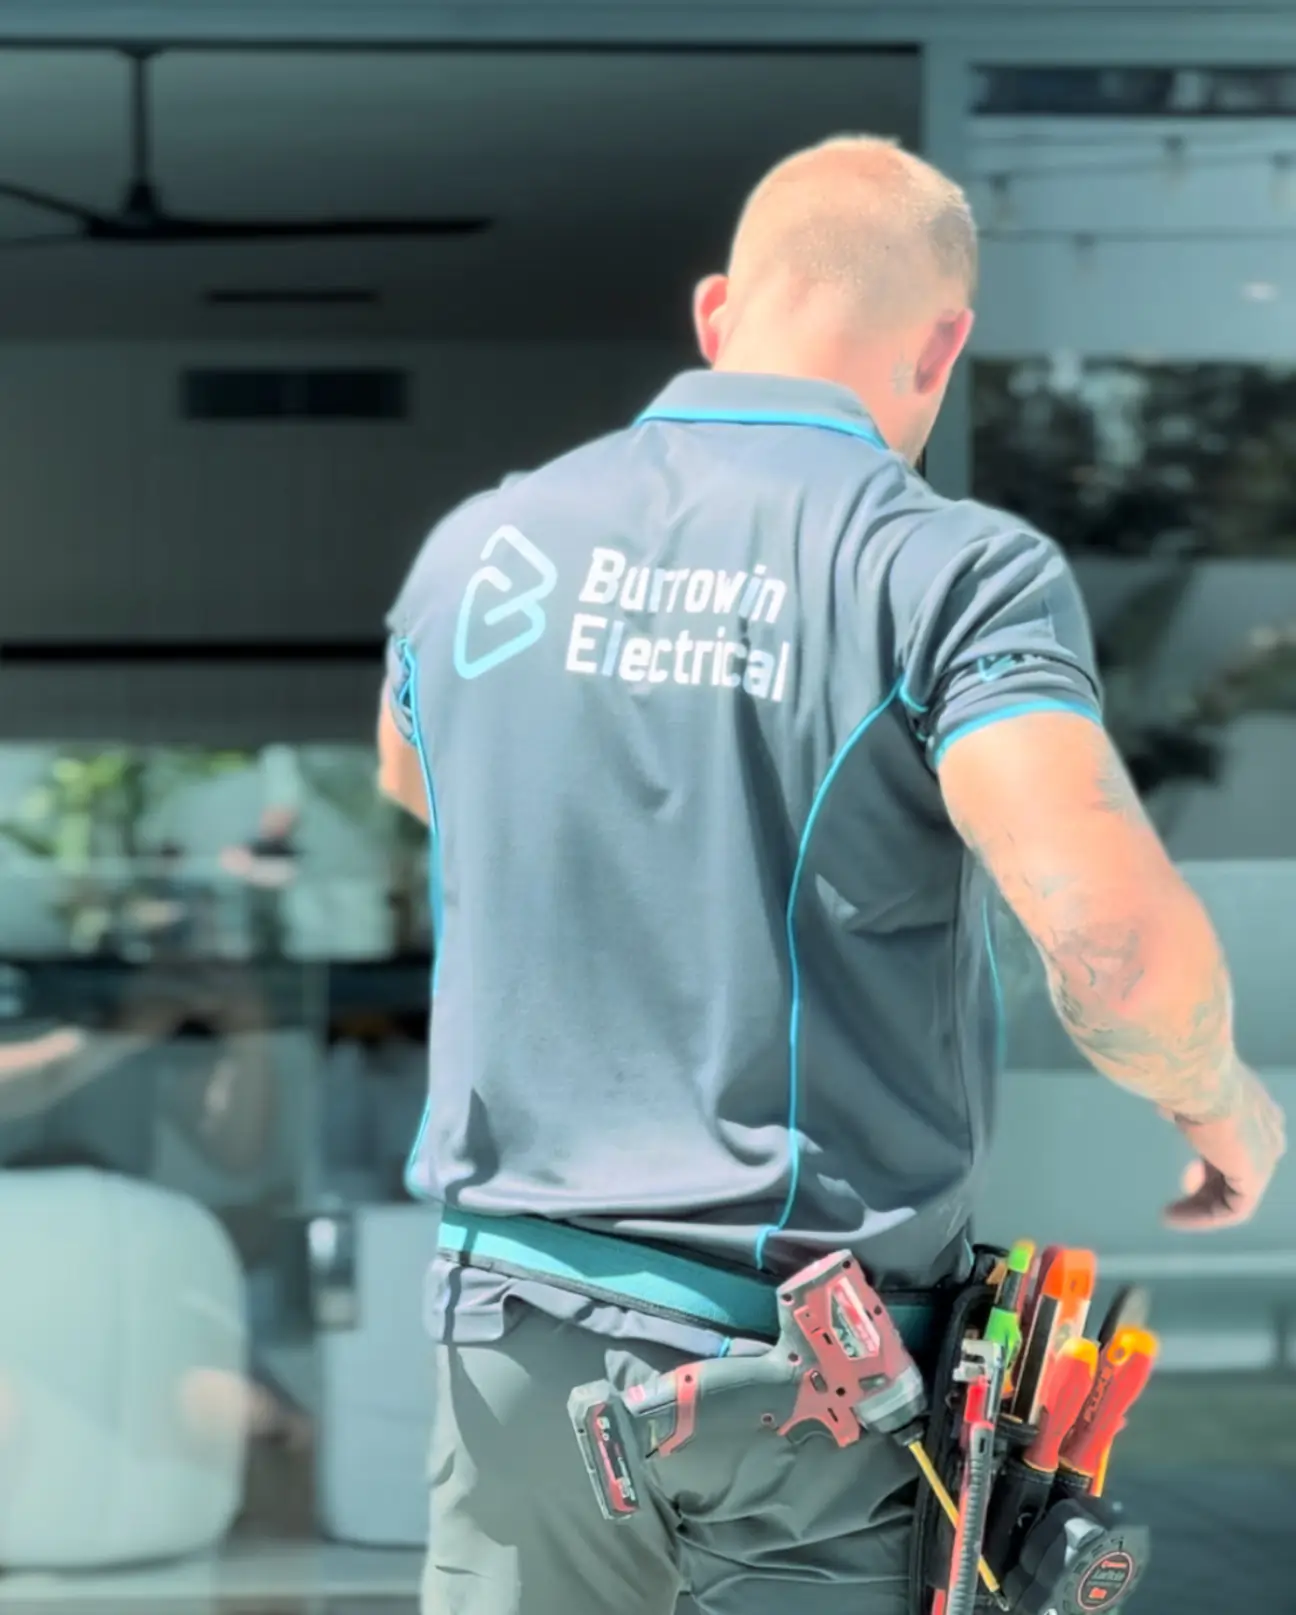 Taylor Burrowin from Burrowin Electrical - A Gold Coast based Electrician with over 15 years of experience.